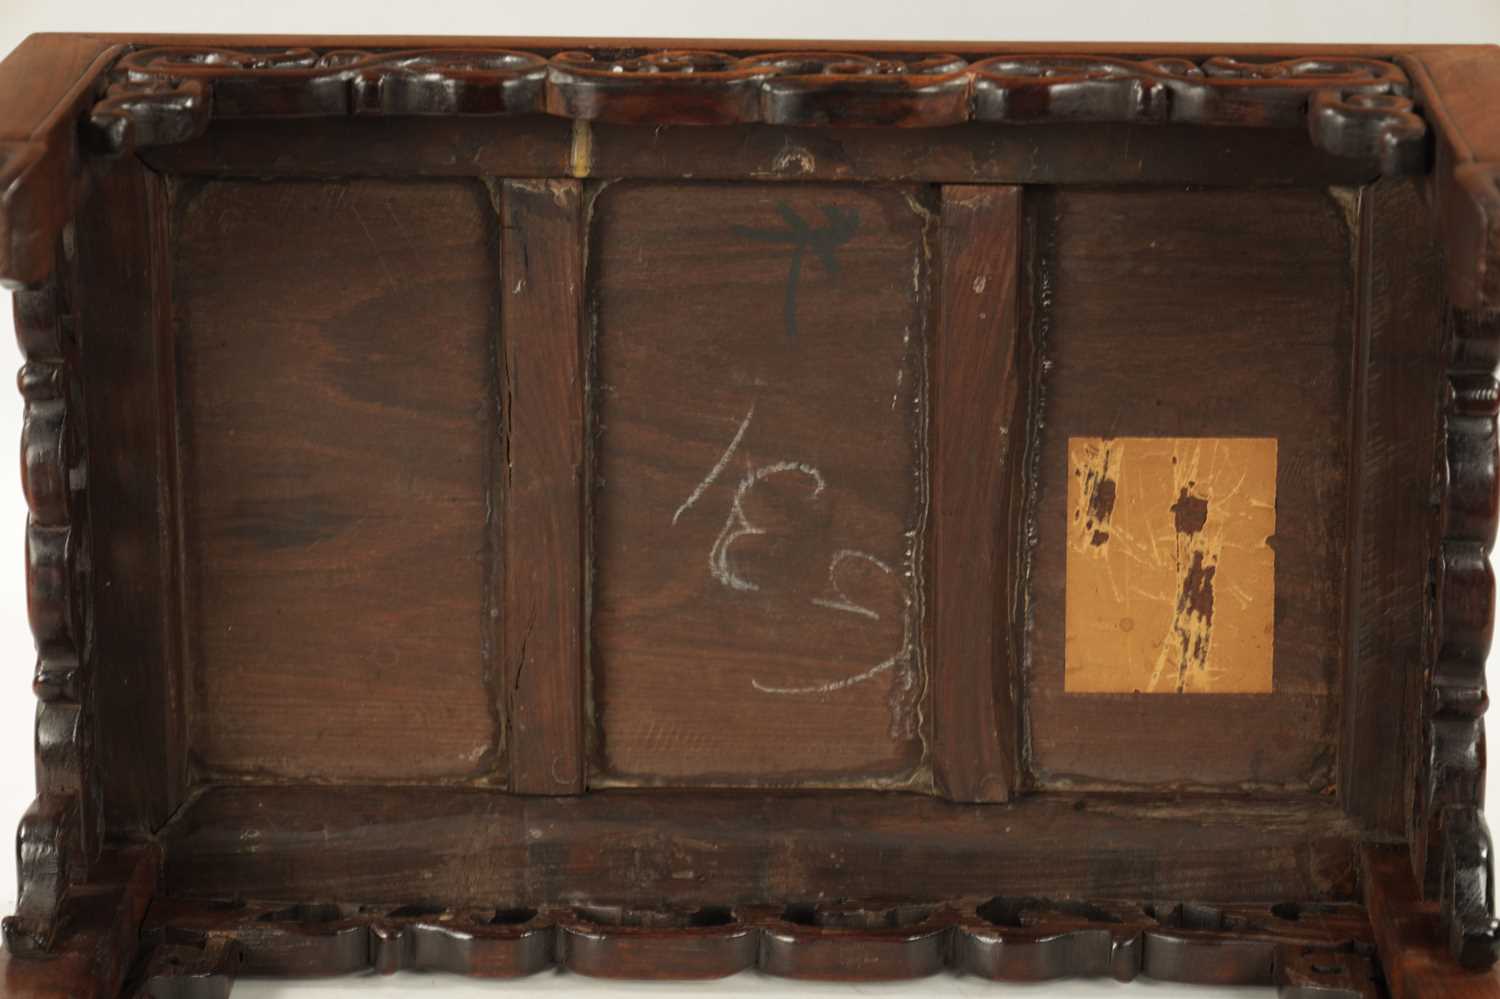 A LATE 19TH CENTURY CHINESE TABLE, POSSIBLY HUANGHUALI - Image 6 of 6